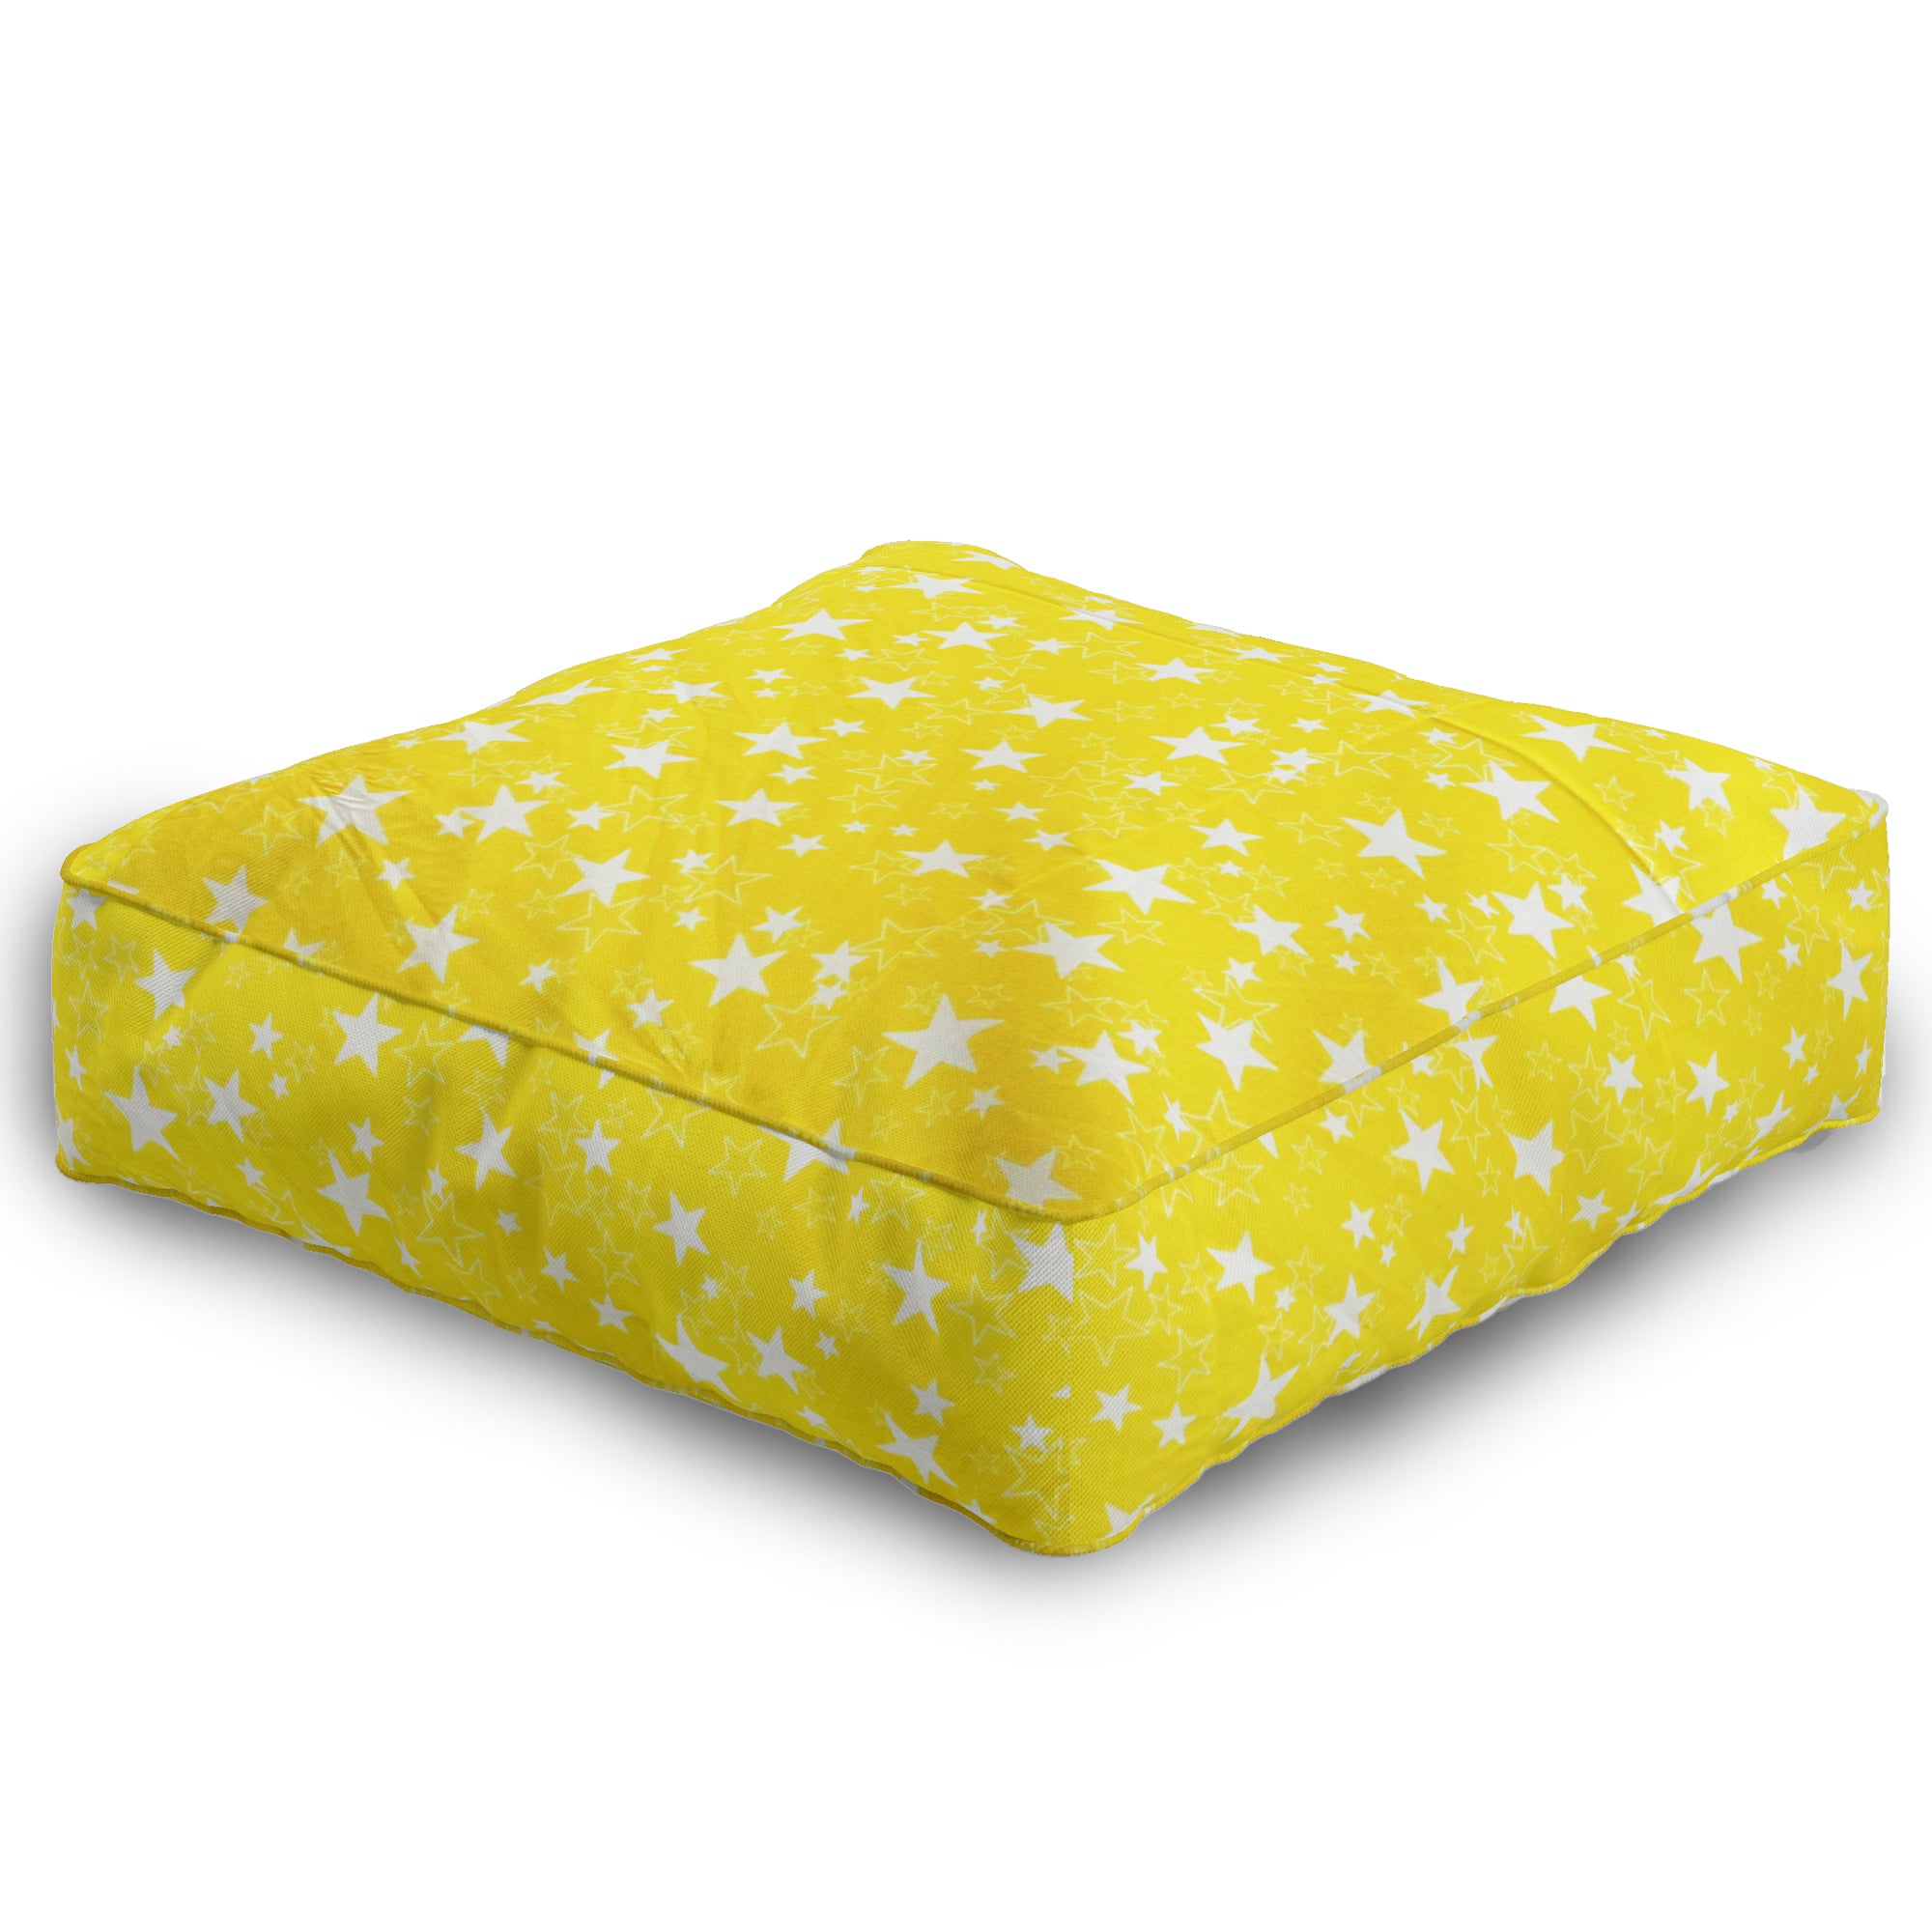 Coozly Zippered Foam Floor Cushions | Seat Cushions | Sofa Cushions with Removable Covers - Yellow Star